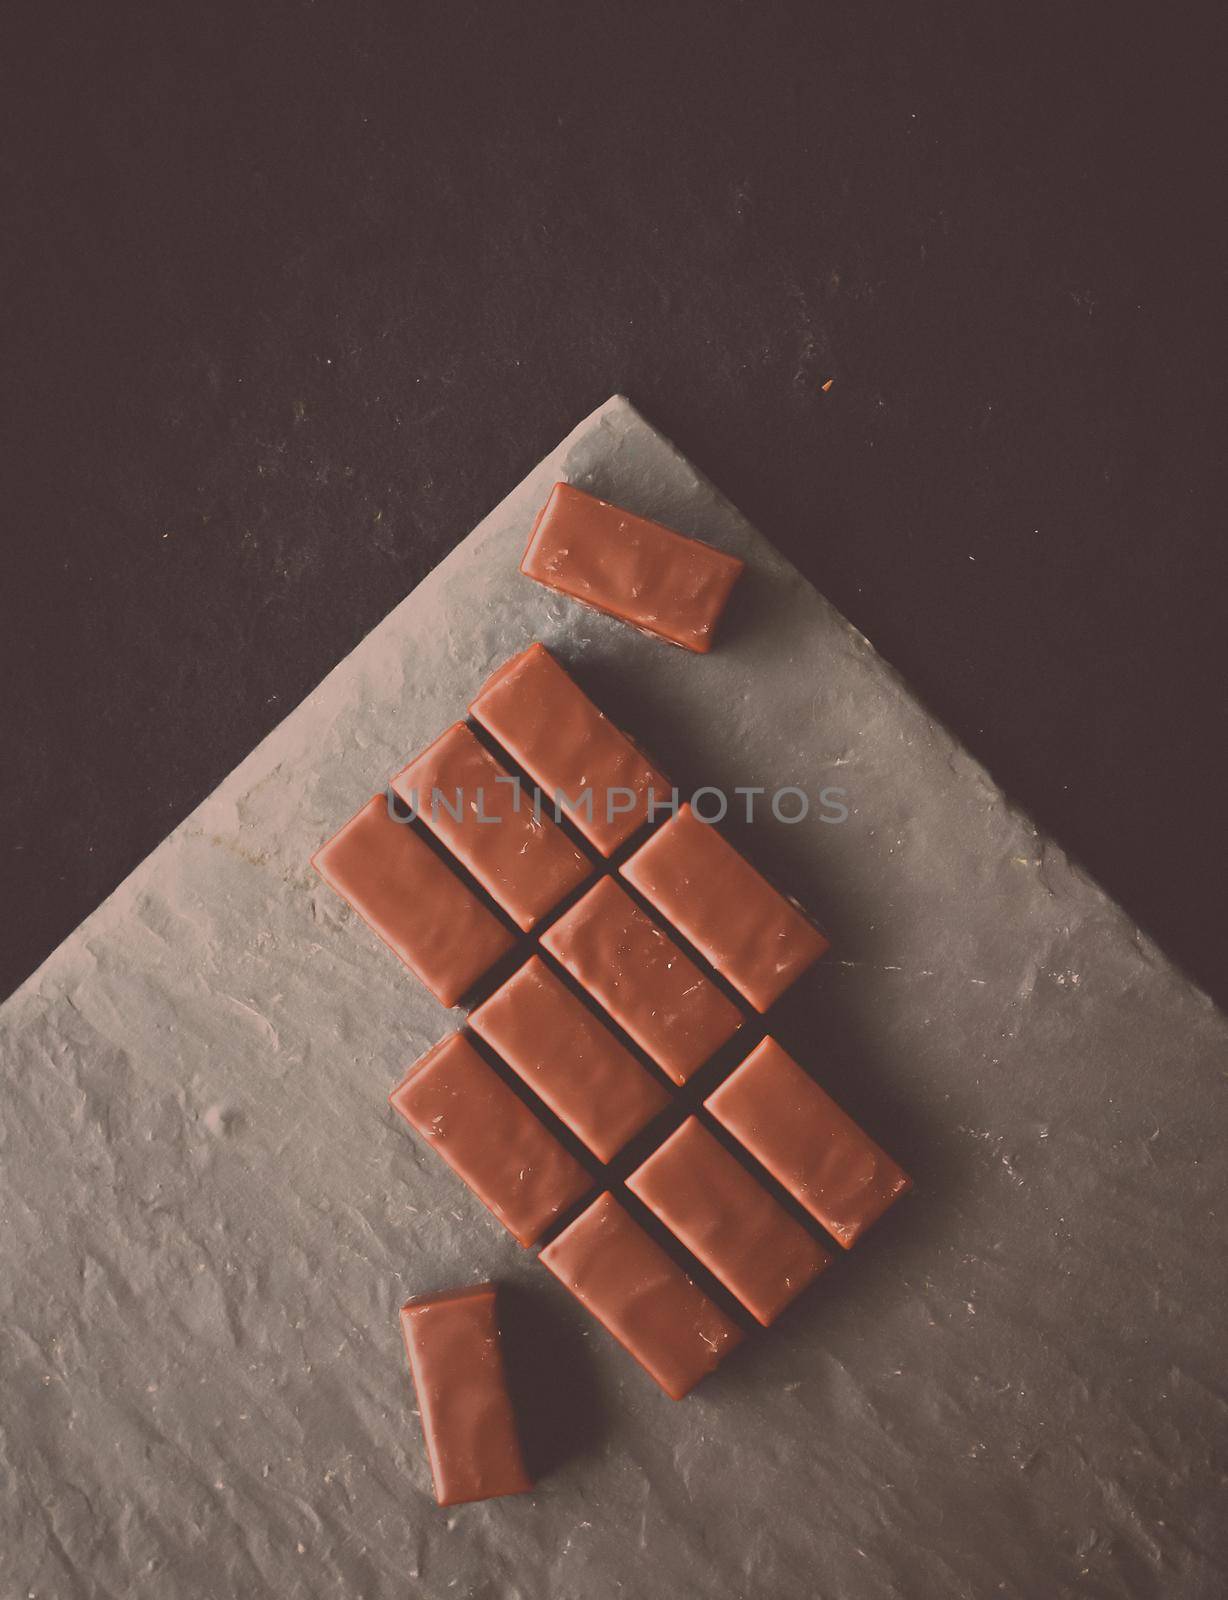 Sweet swiss chocolate candies on a stone tabletop, flatlay - desserts, confectionery and gluten-free organic food concept. All you need is chocolate